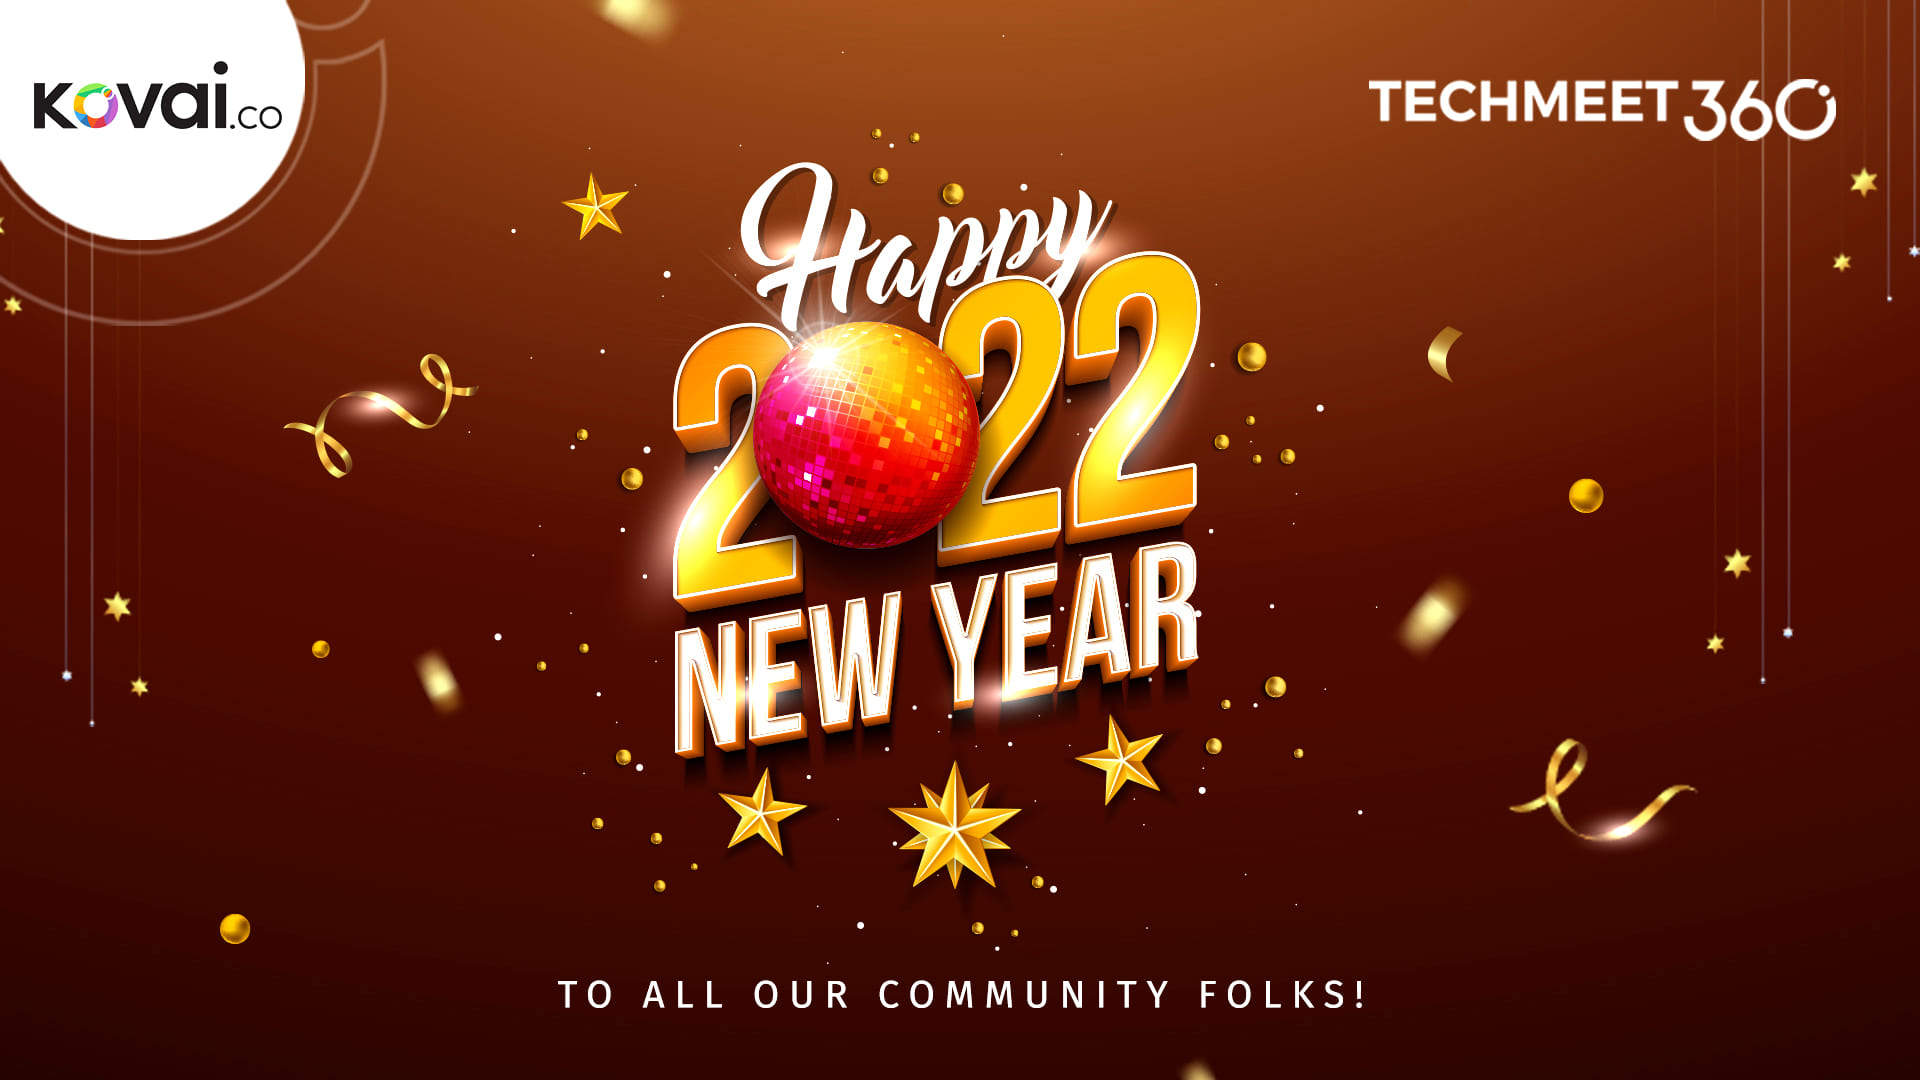 Techmeet360 We Take A Moment To Thank All Our Speakers And Participants And We Wish You All A Happy New Year And Hope To See You Again At Our Events